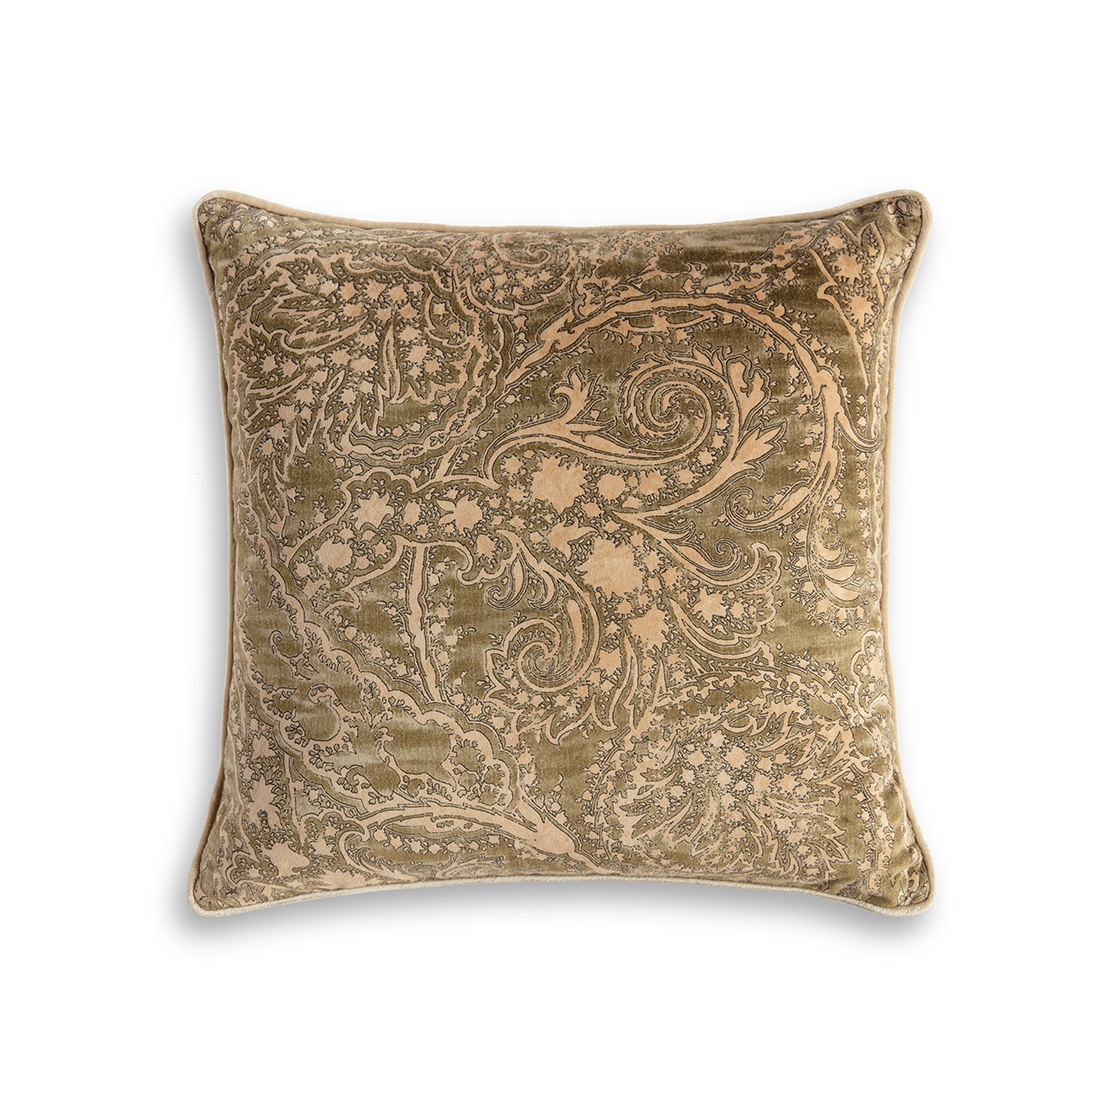 Balthazar - Laurel cushion with Como - Fern back and piping - Beaumont & Fletcher